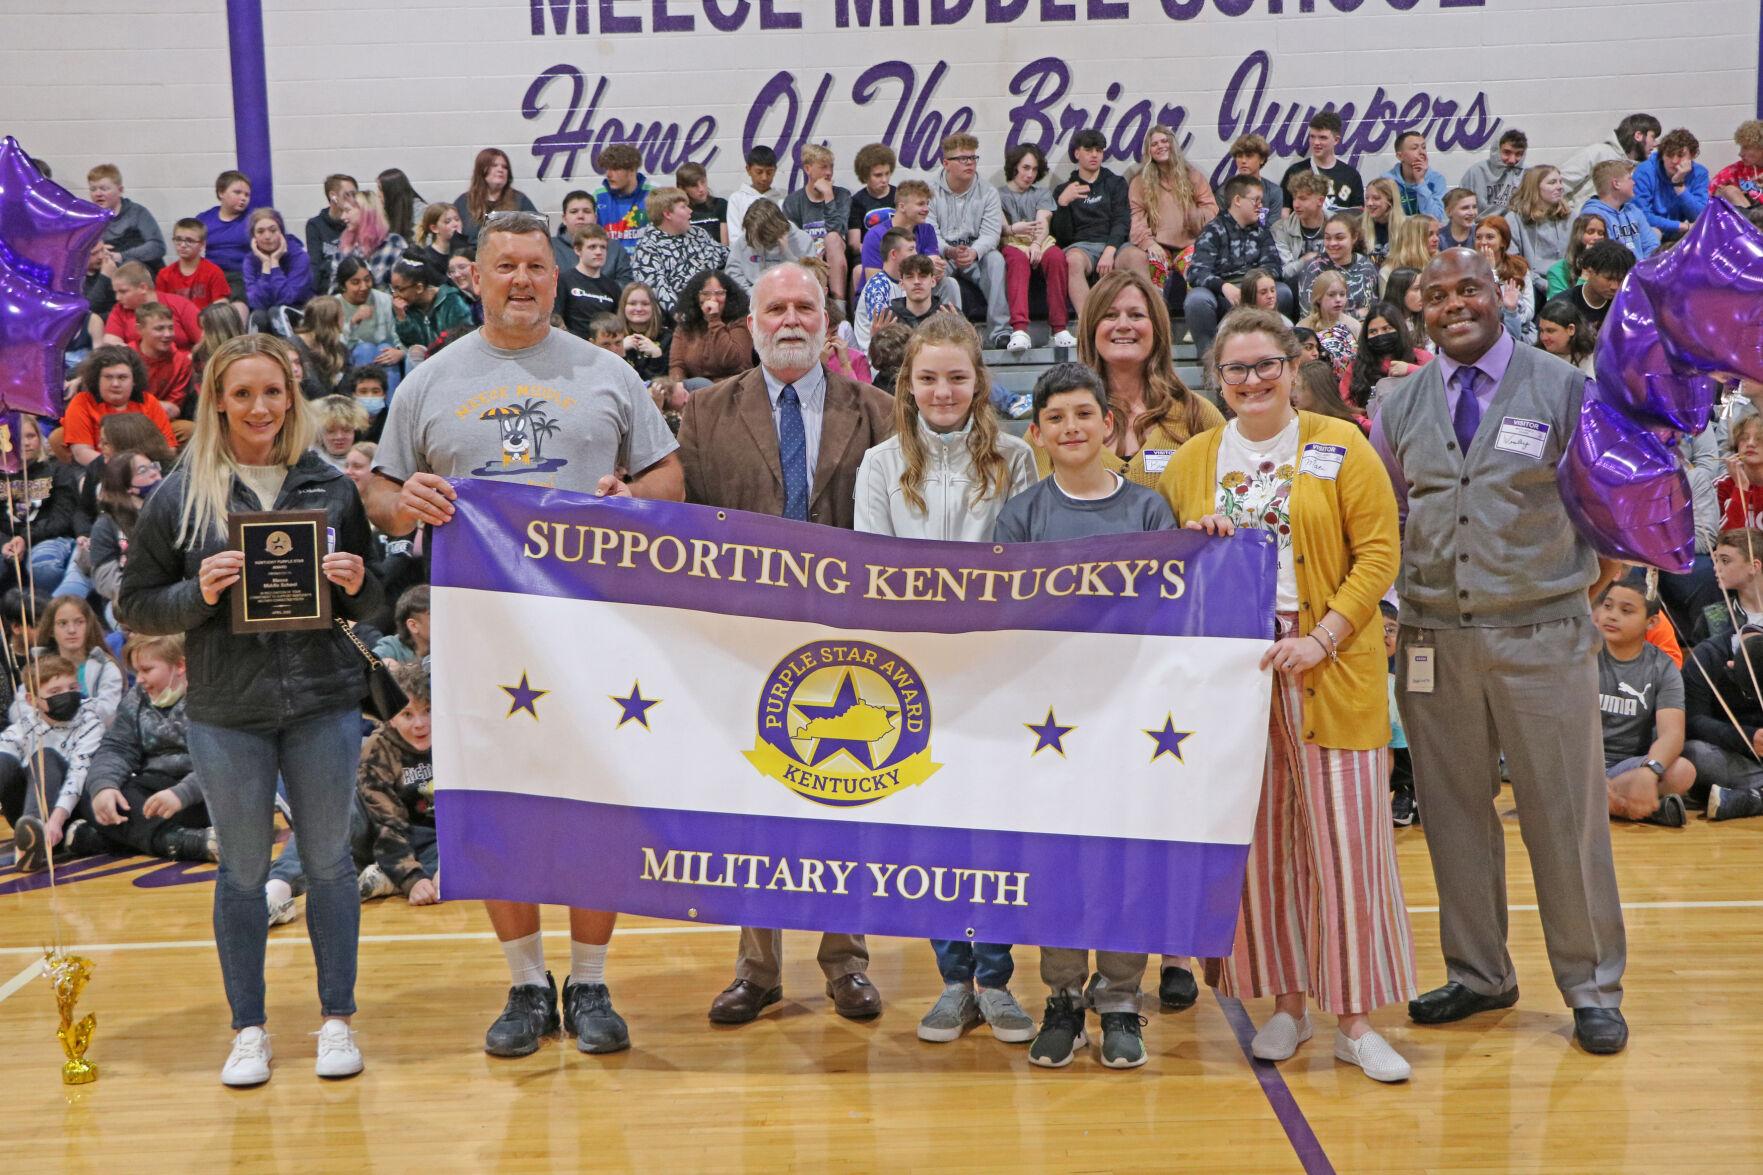 Students and staff at Meece Middle School hold their Purple Star Award sign during a ceremony.